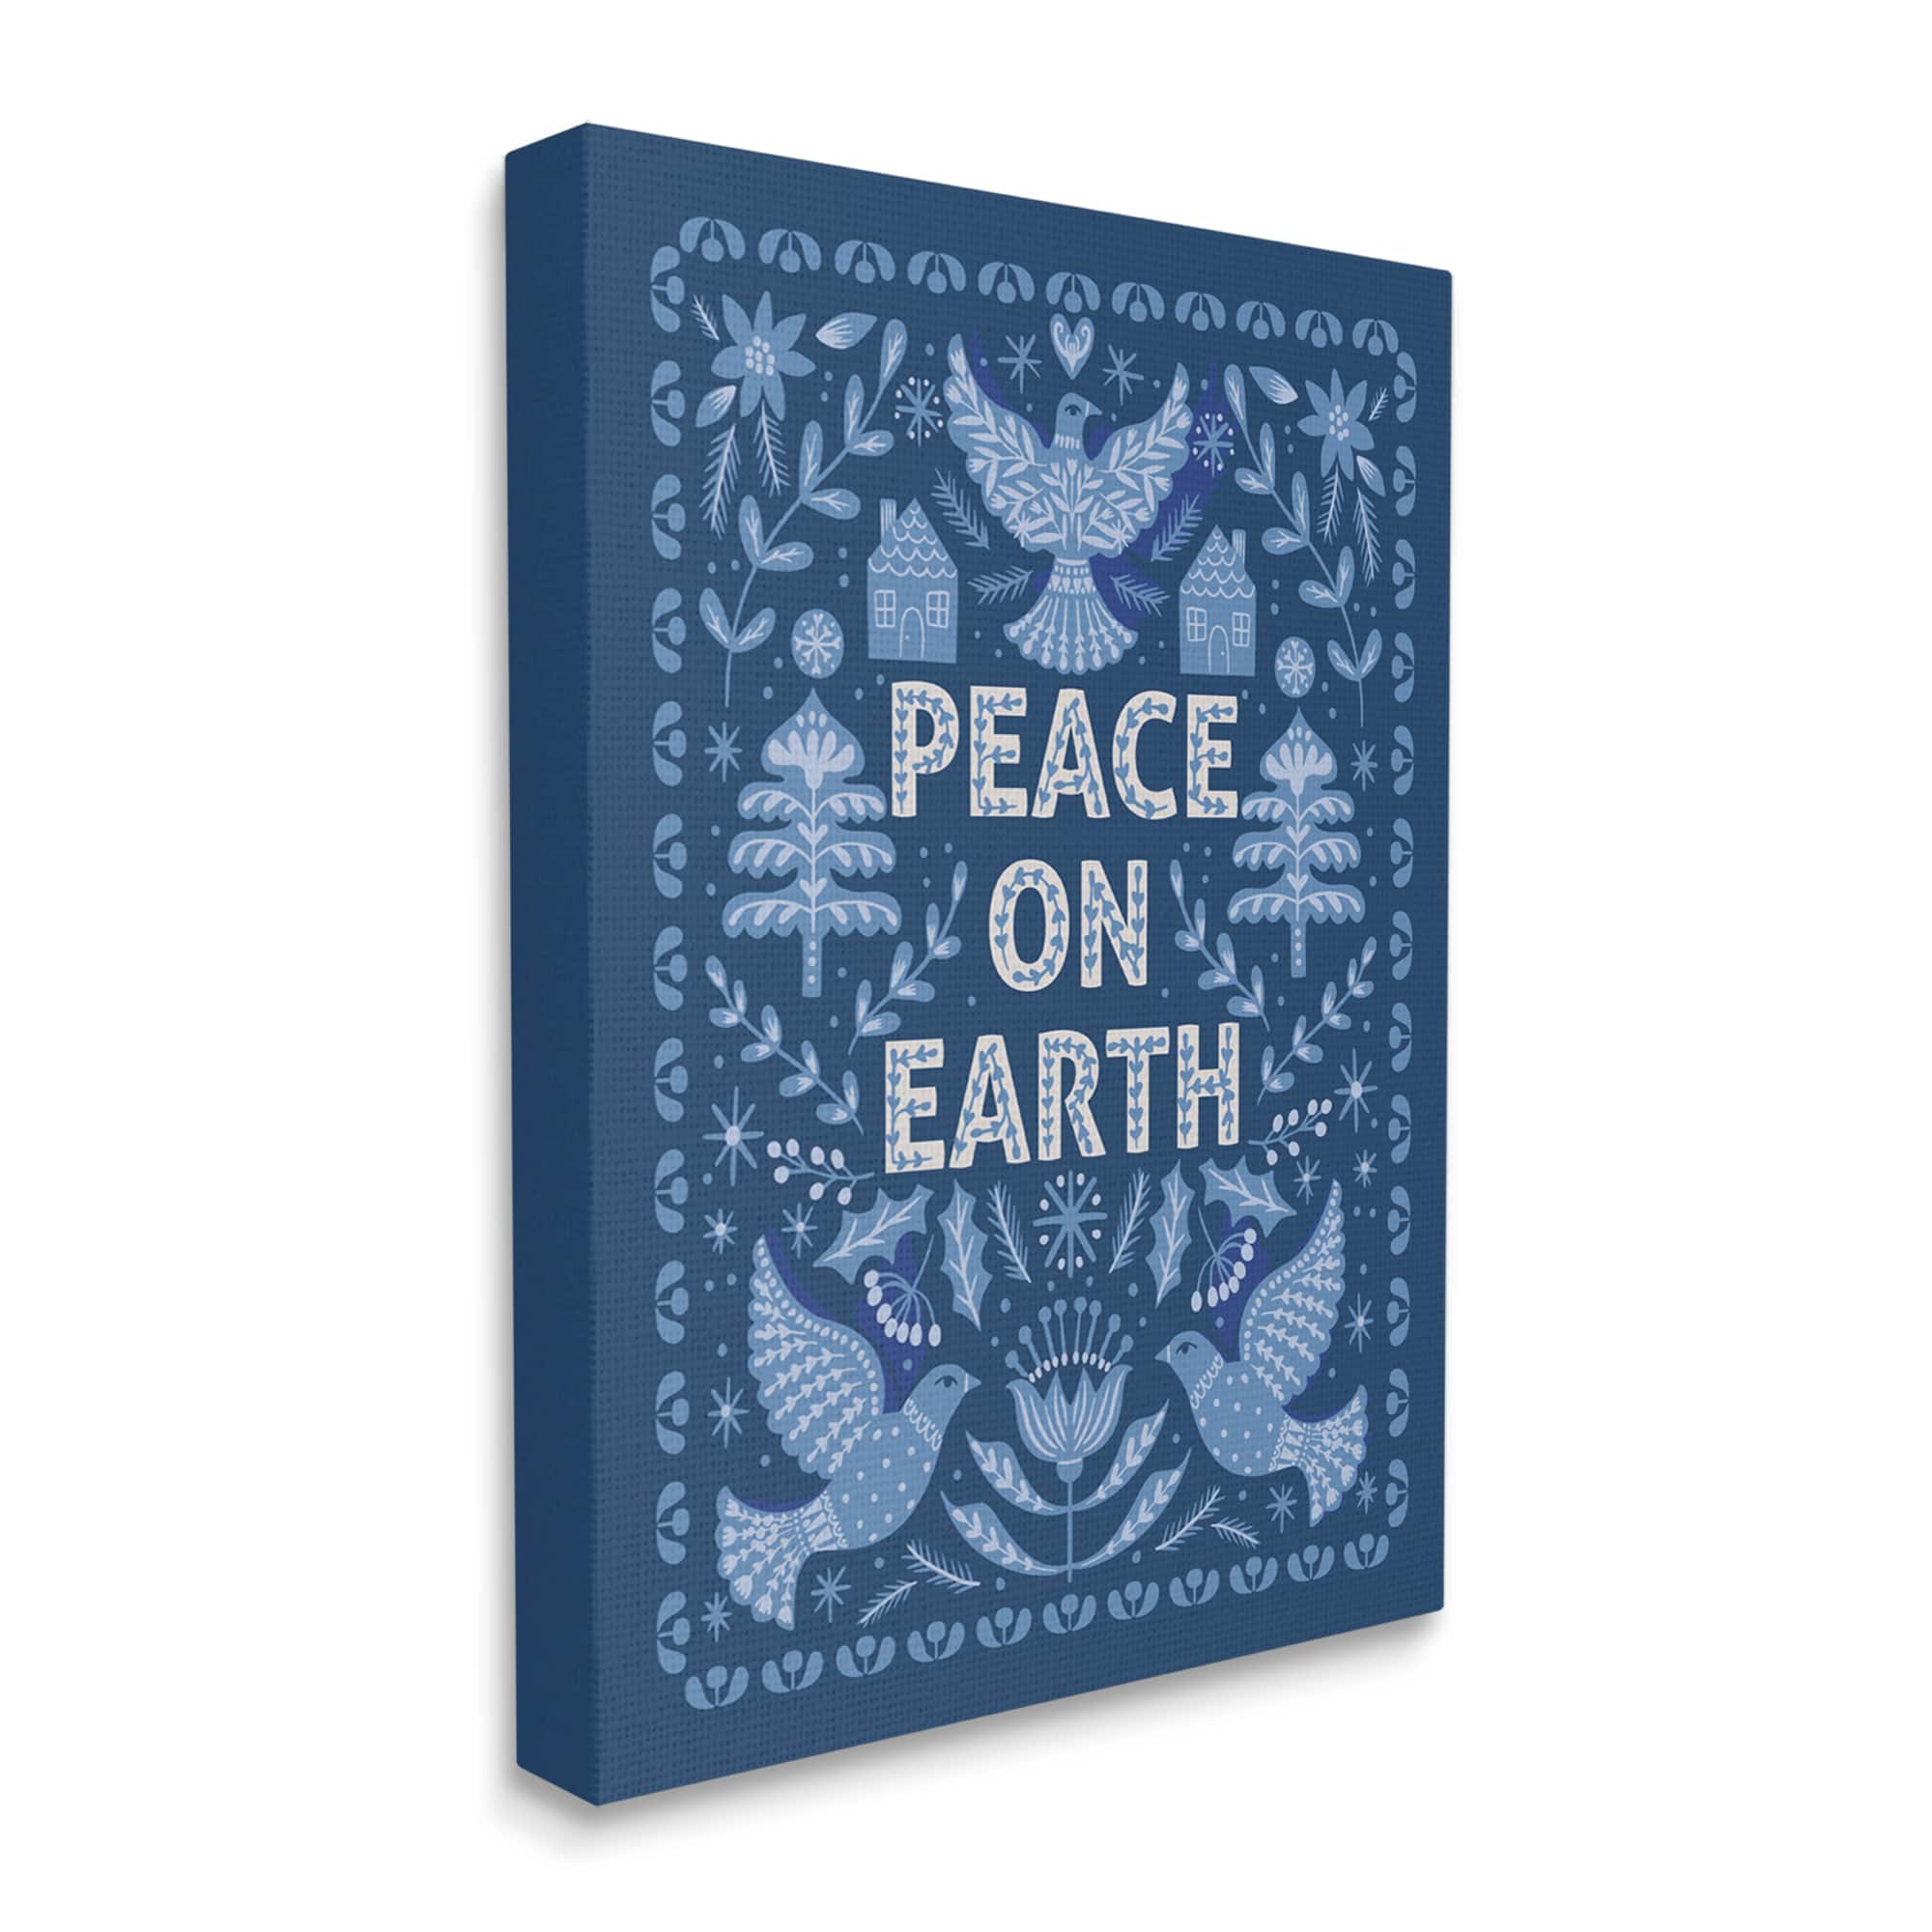 Stupell Industries Peace On Earth Blue Doves Canvas Wall Art